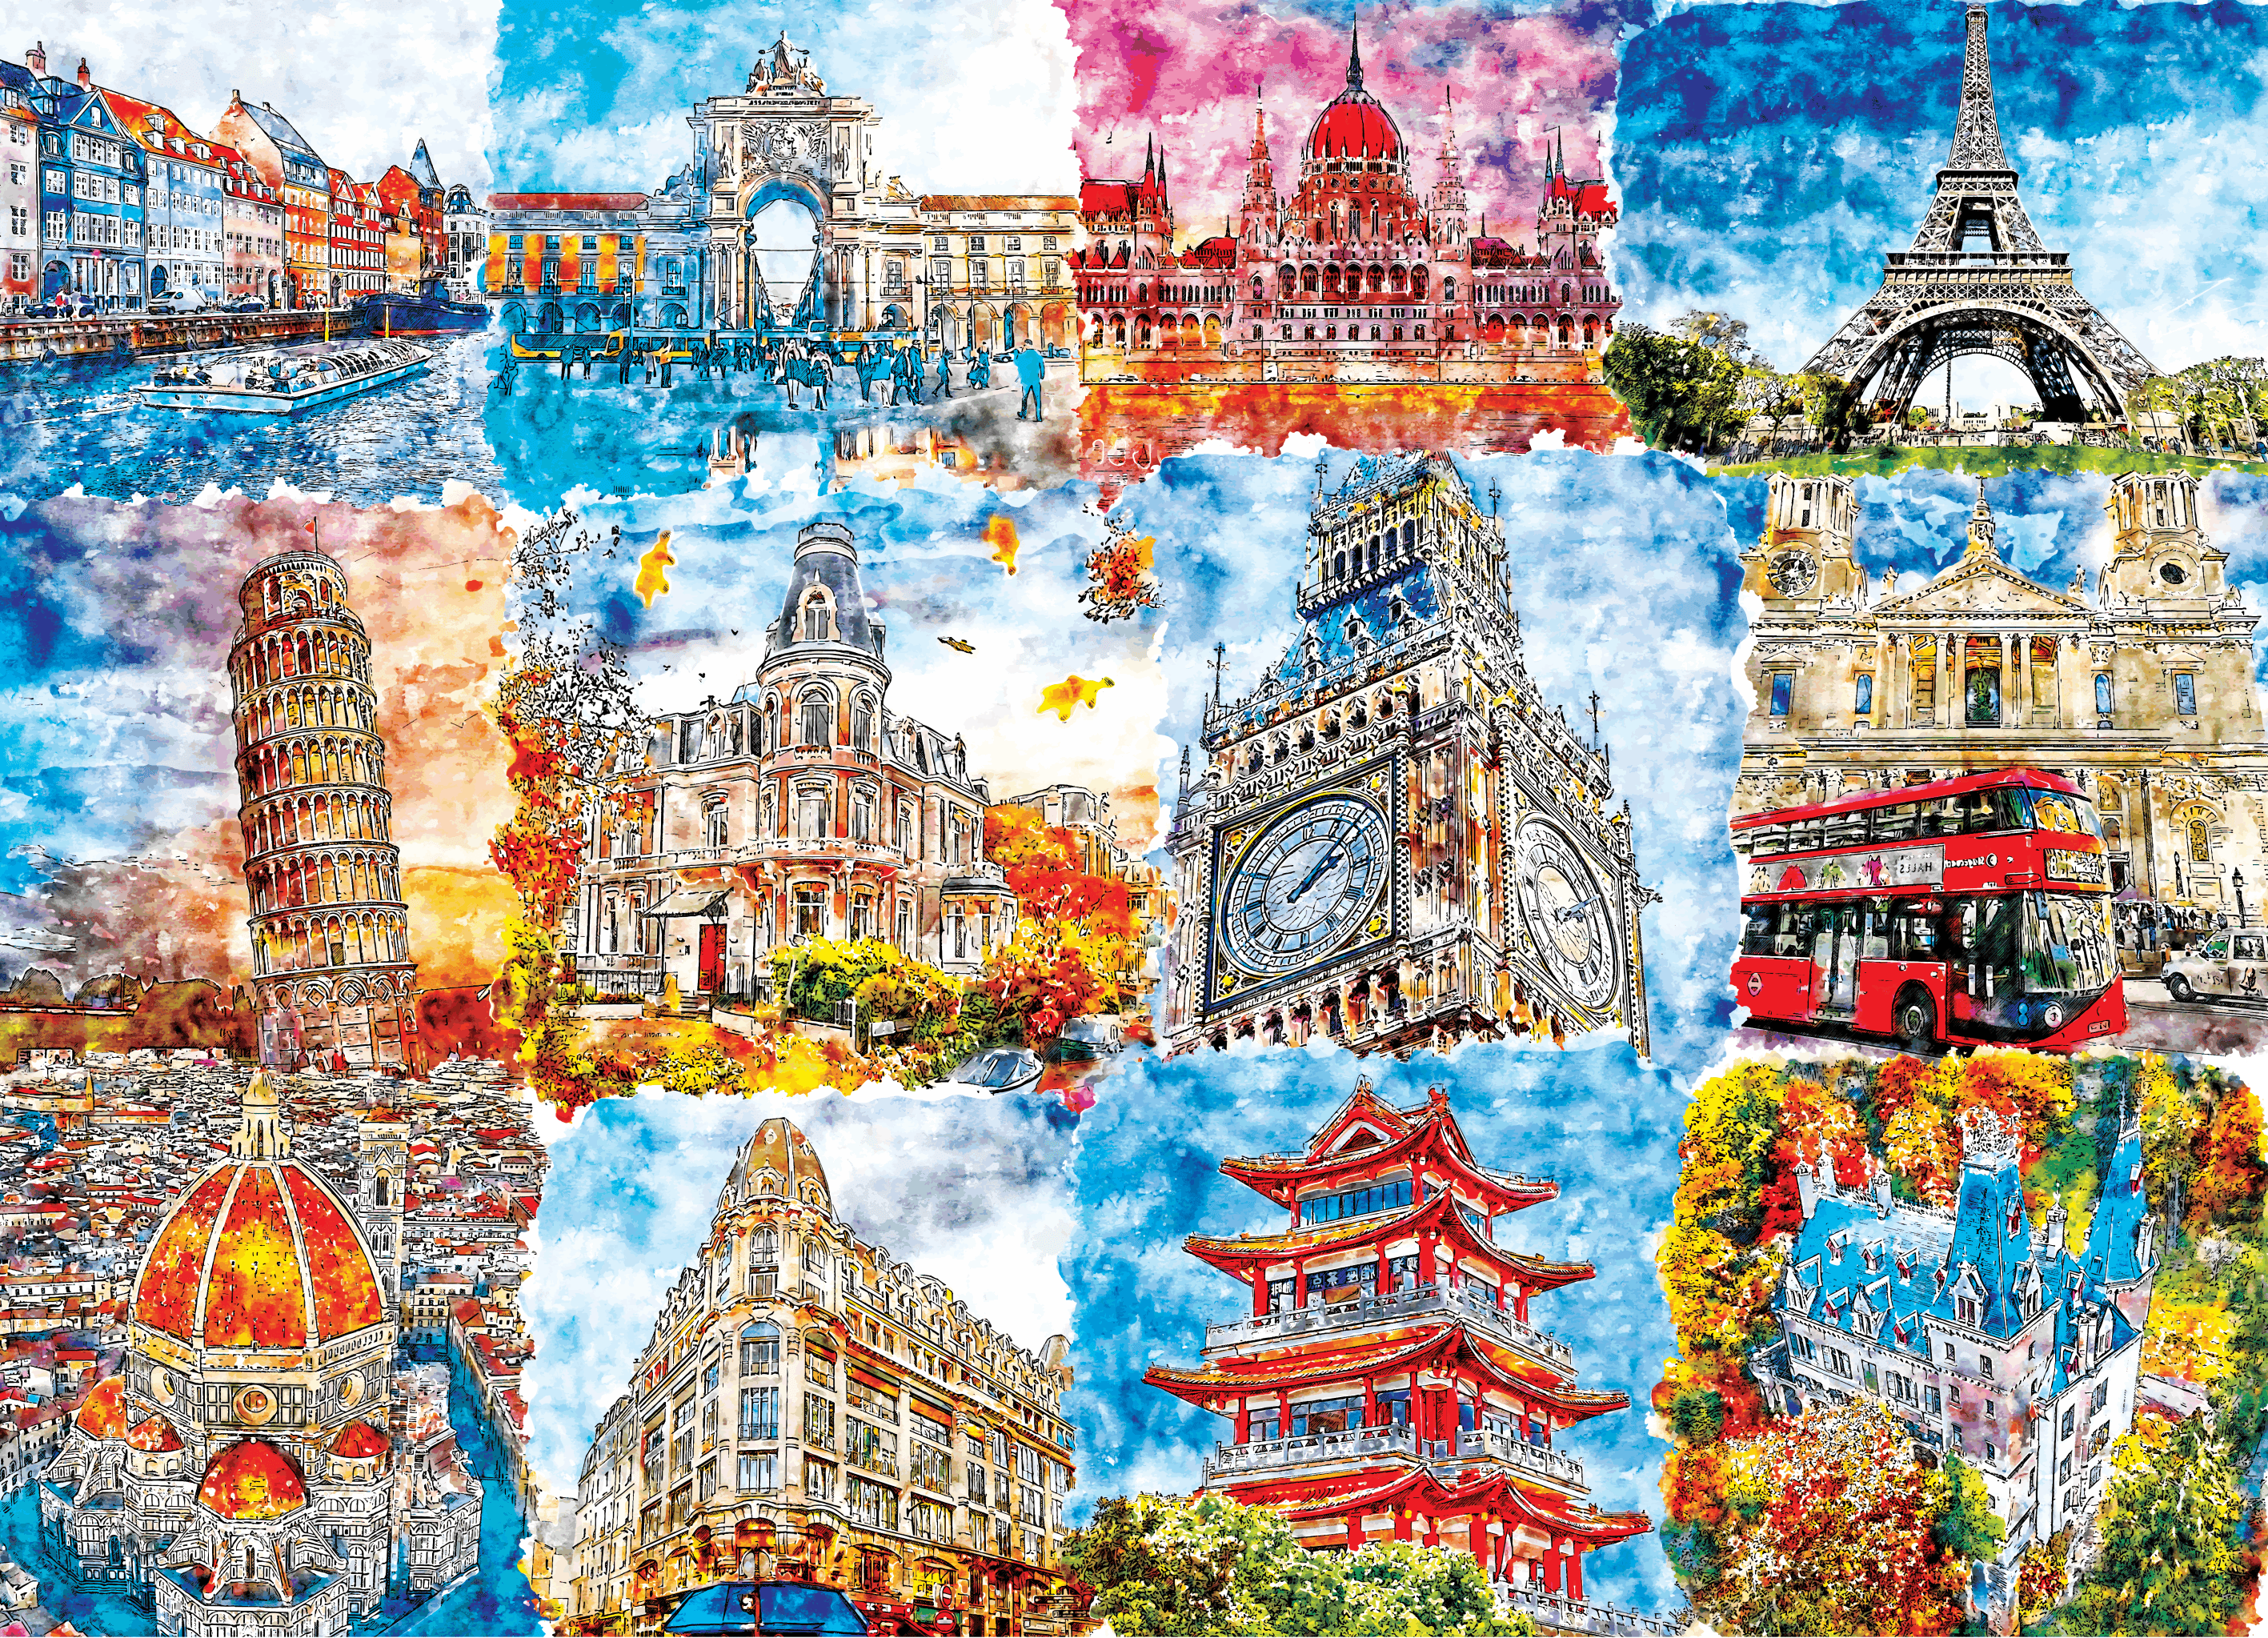 Animal Landscape 4000 Pieces of Jigsaw Art Fun Family Puzzles Perfectly Assembled Jigsaw Puzzles Adult Jigsaw Puzzles